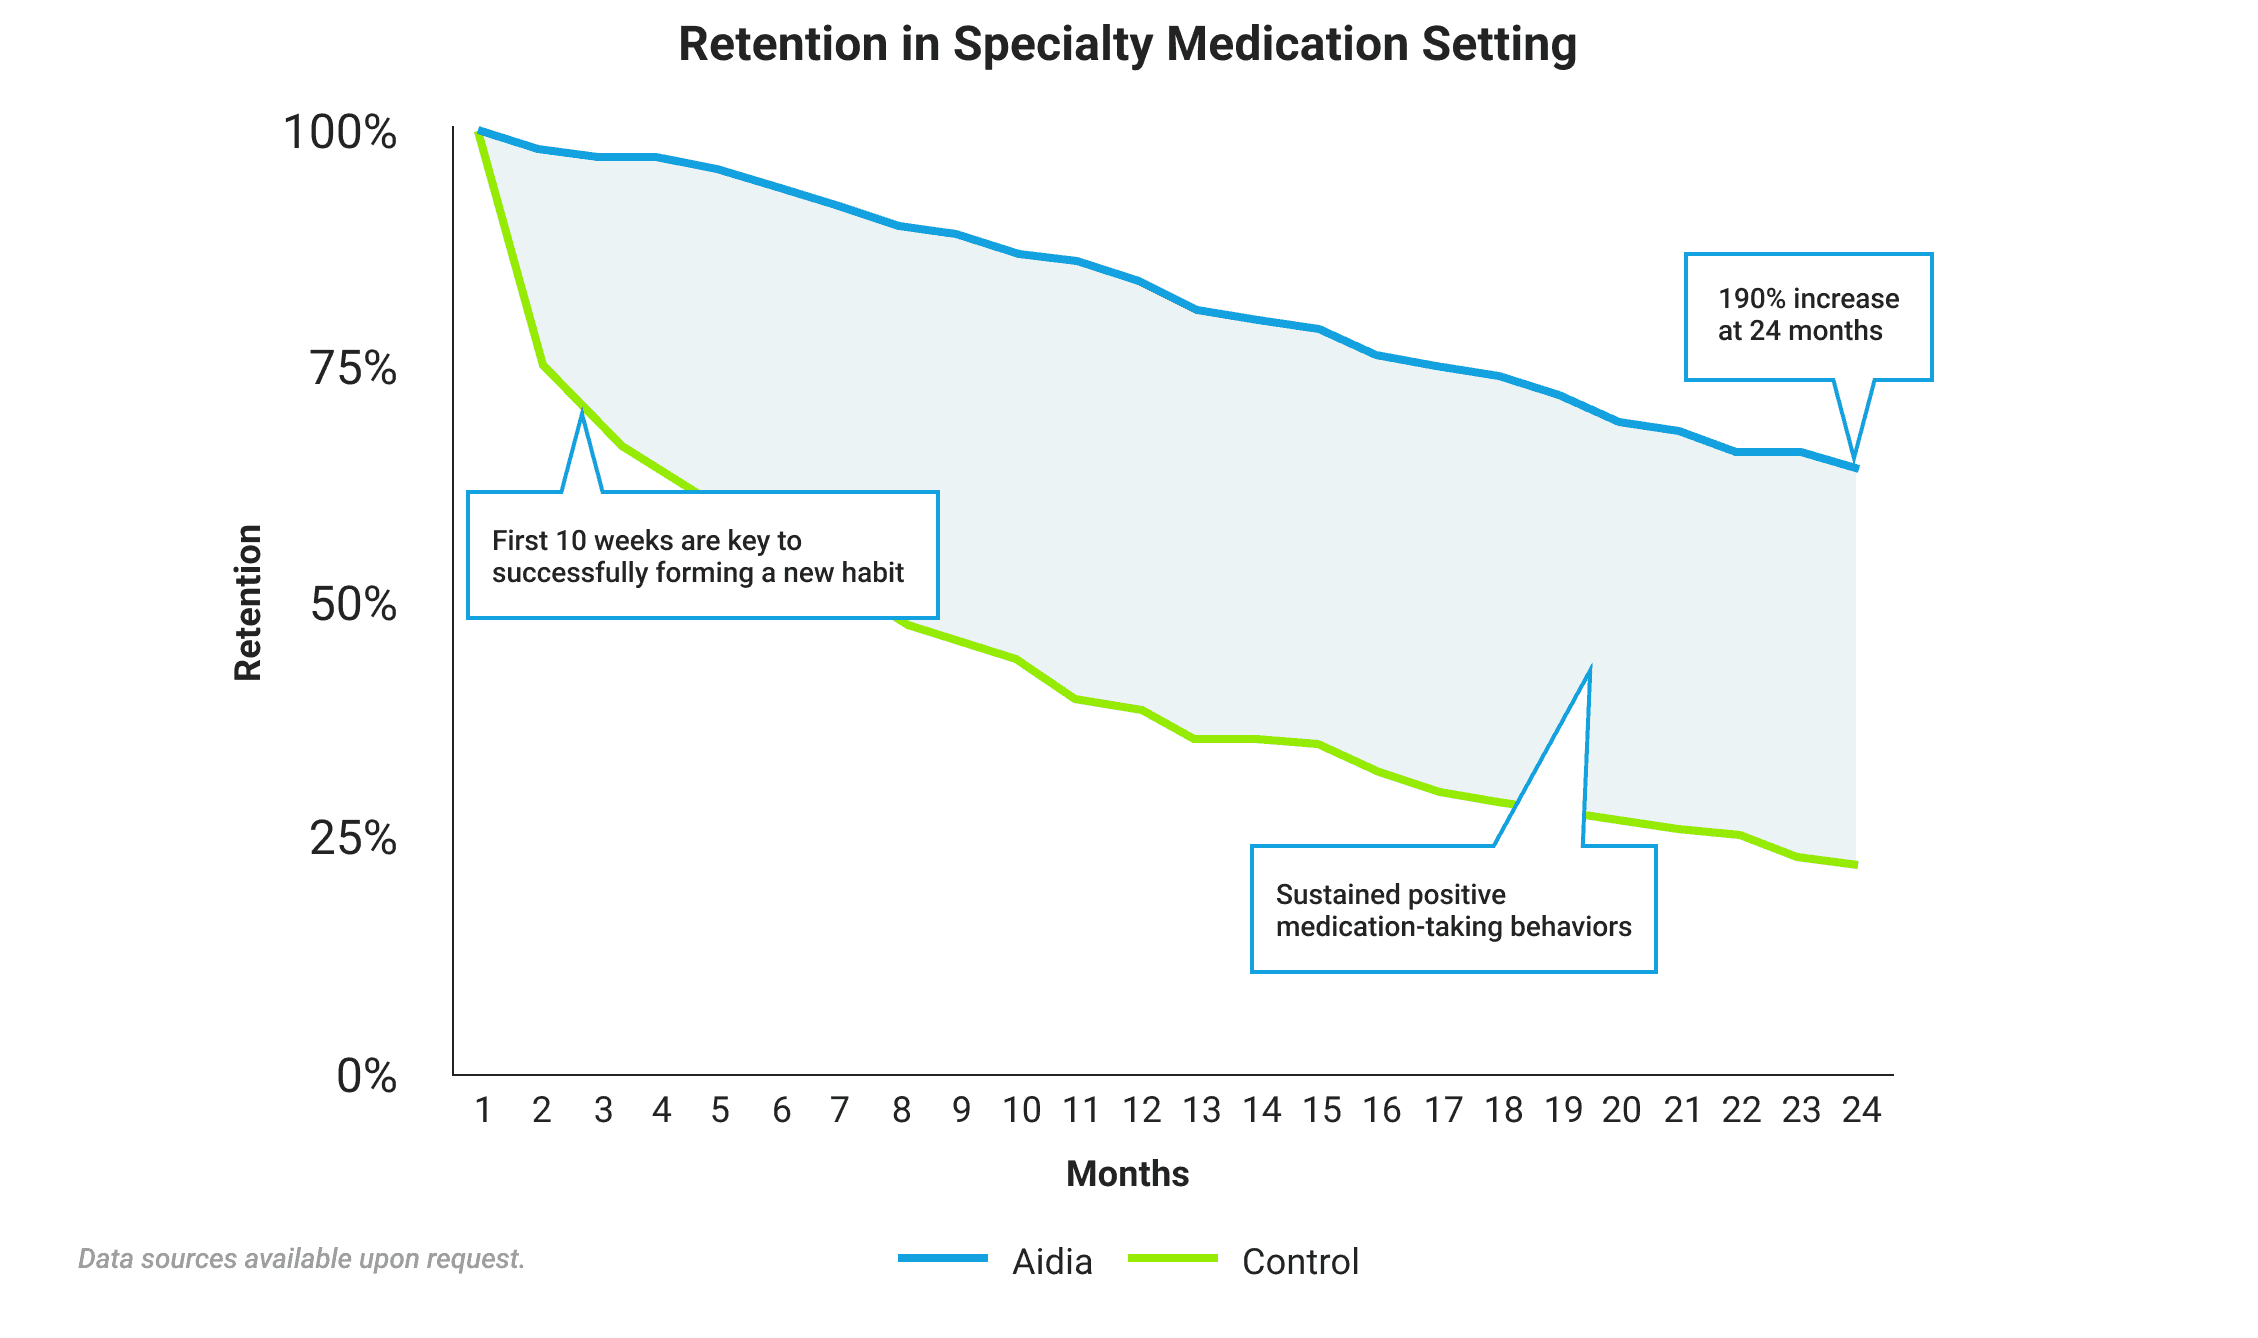 Retention in Specialty Medication Setting